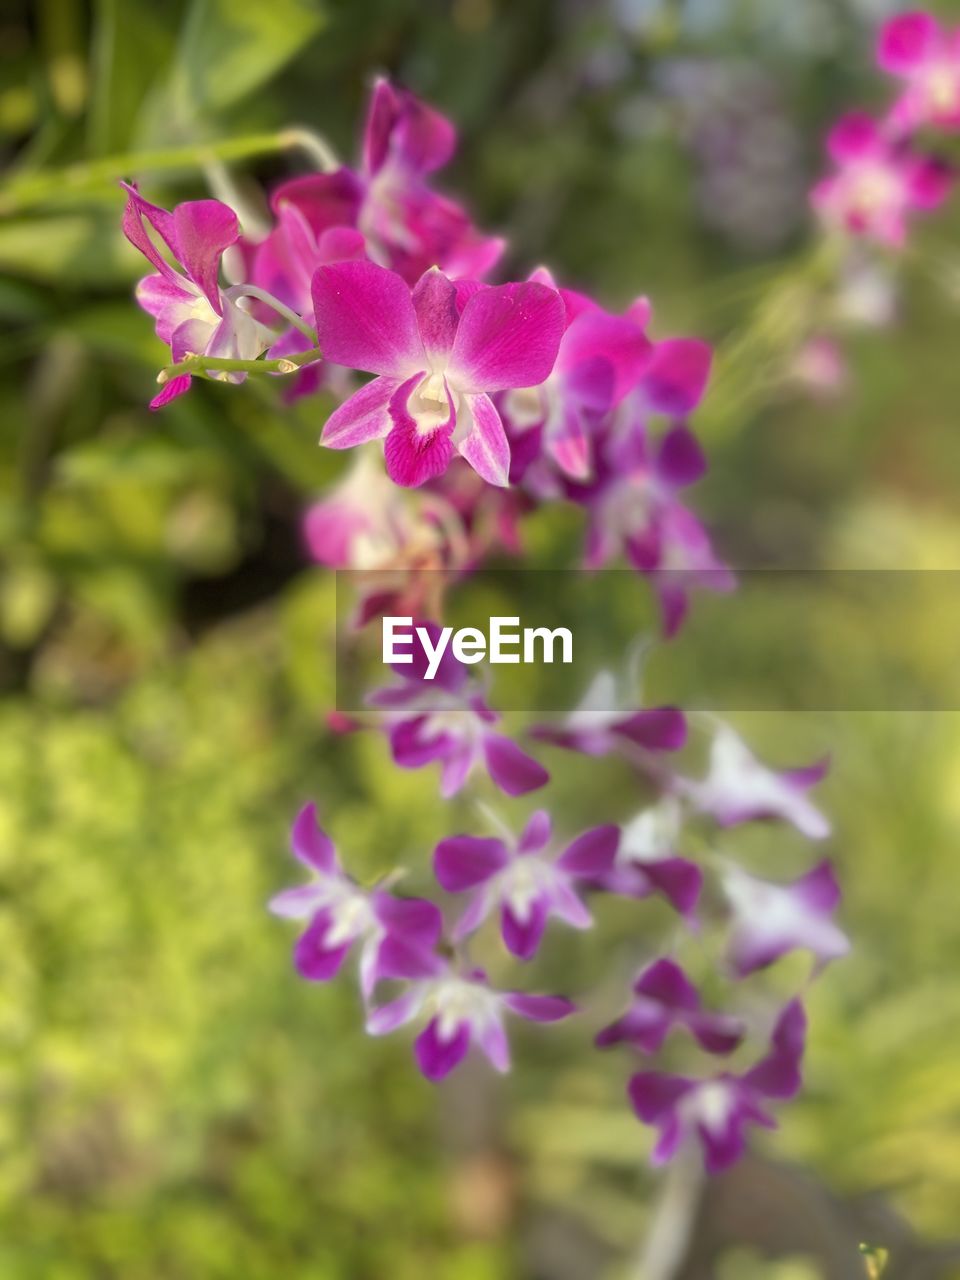 flower, flowering plant, plant, beauty in nature, freshness, fragility, close-up, purple, pink, nature, petal, growth, flower head, inflorescence, focus on foreground, no people, wildflower, selective focus, blossom, outdoors, springtime, day, botany, plant part